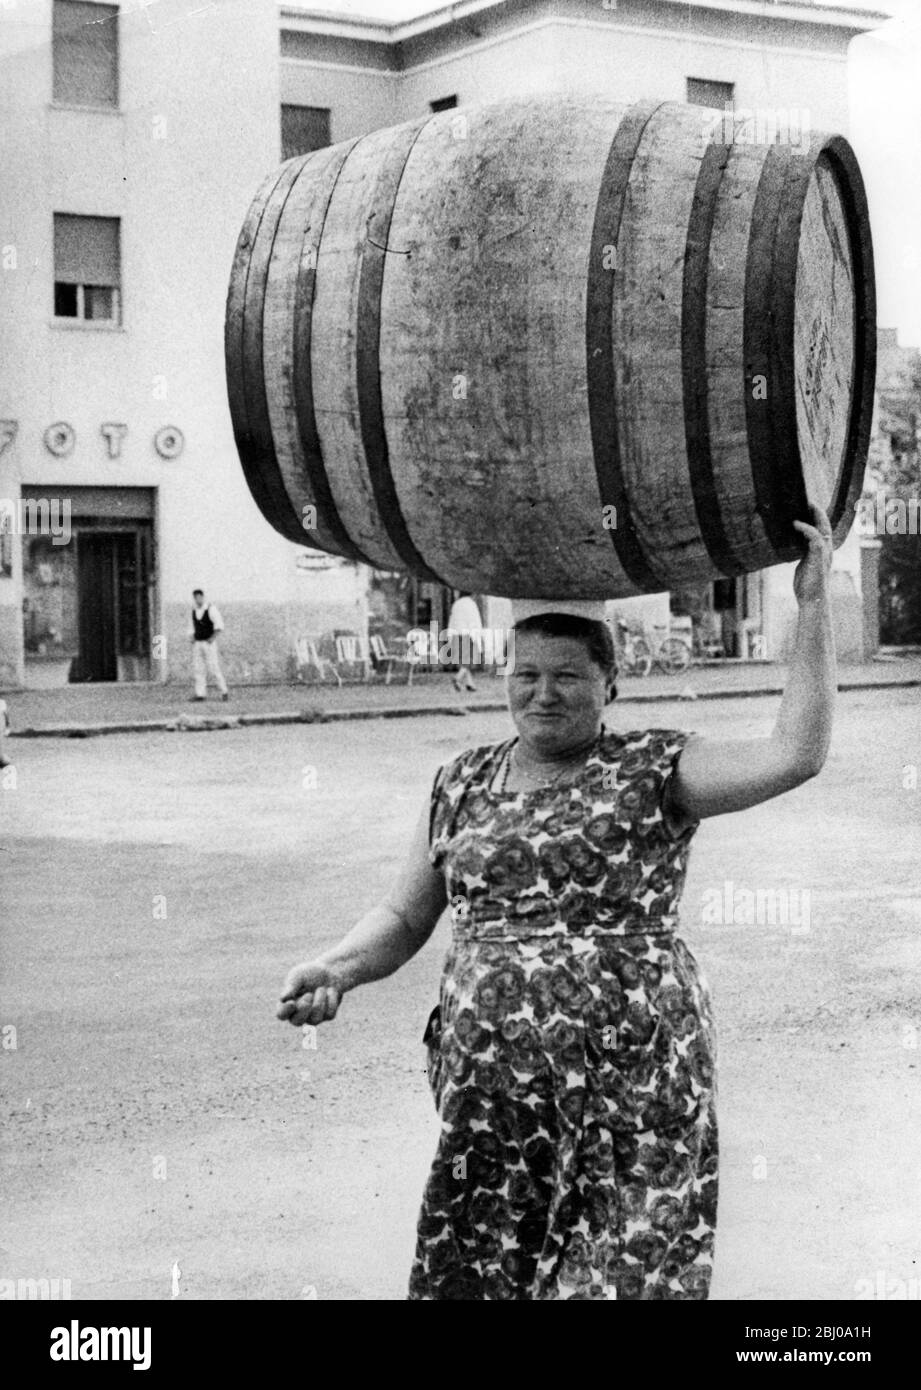 A load on her mind - a woman of Marino, near Rome, Italy, carries a barrel on her head in the traditional way - - 26 November 1960 Stock Photo